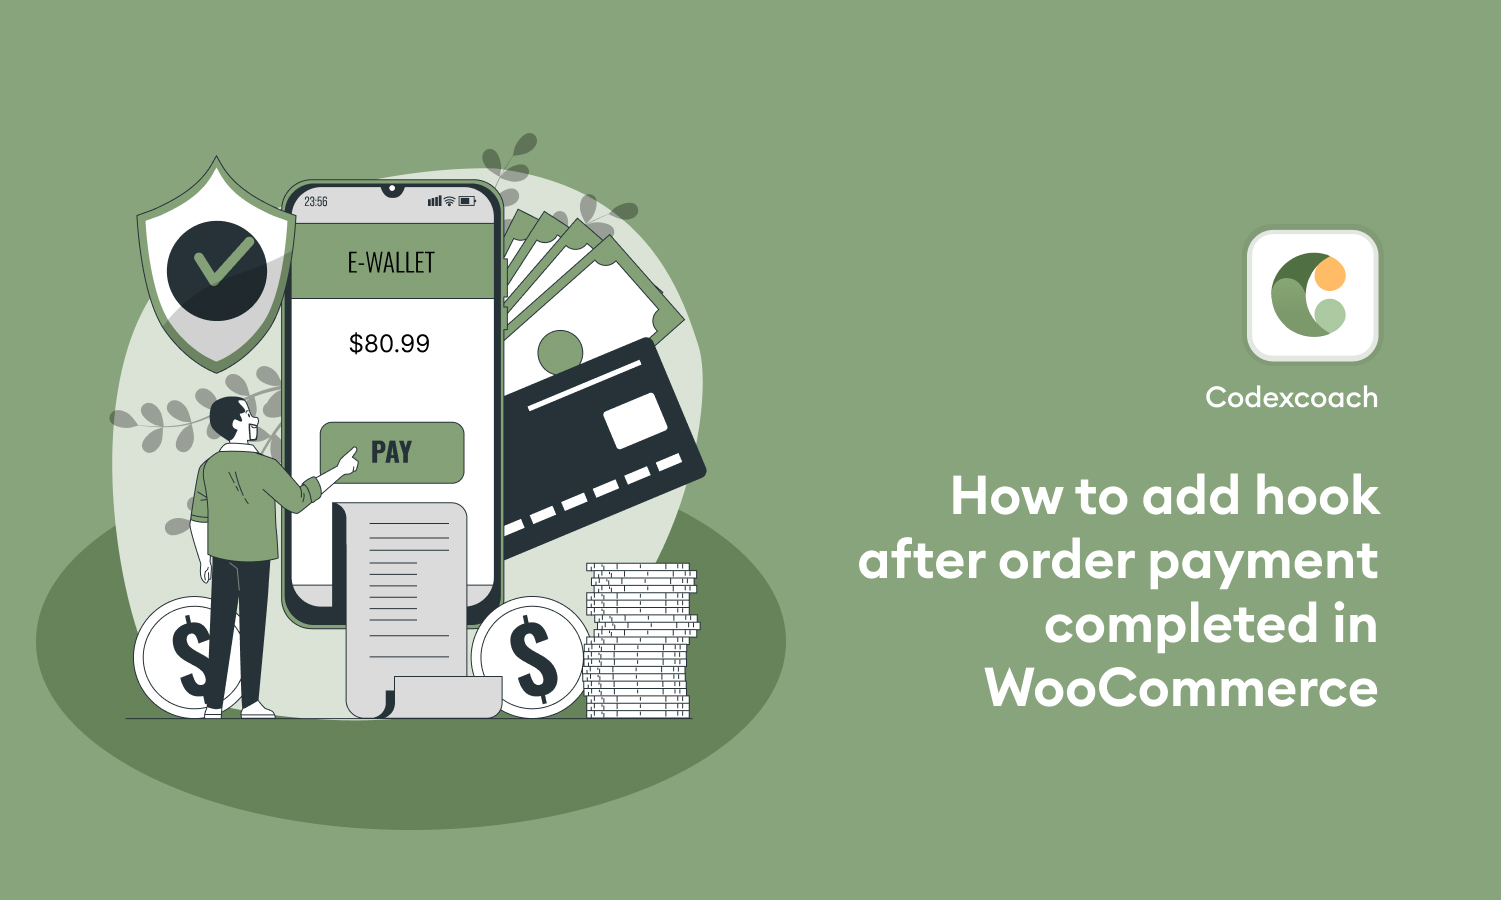 How to add hook after order payment completed in WooCommerce